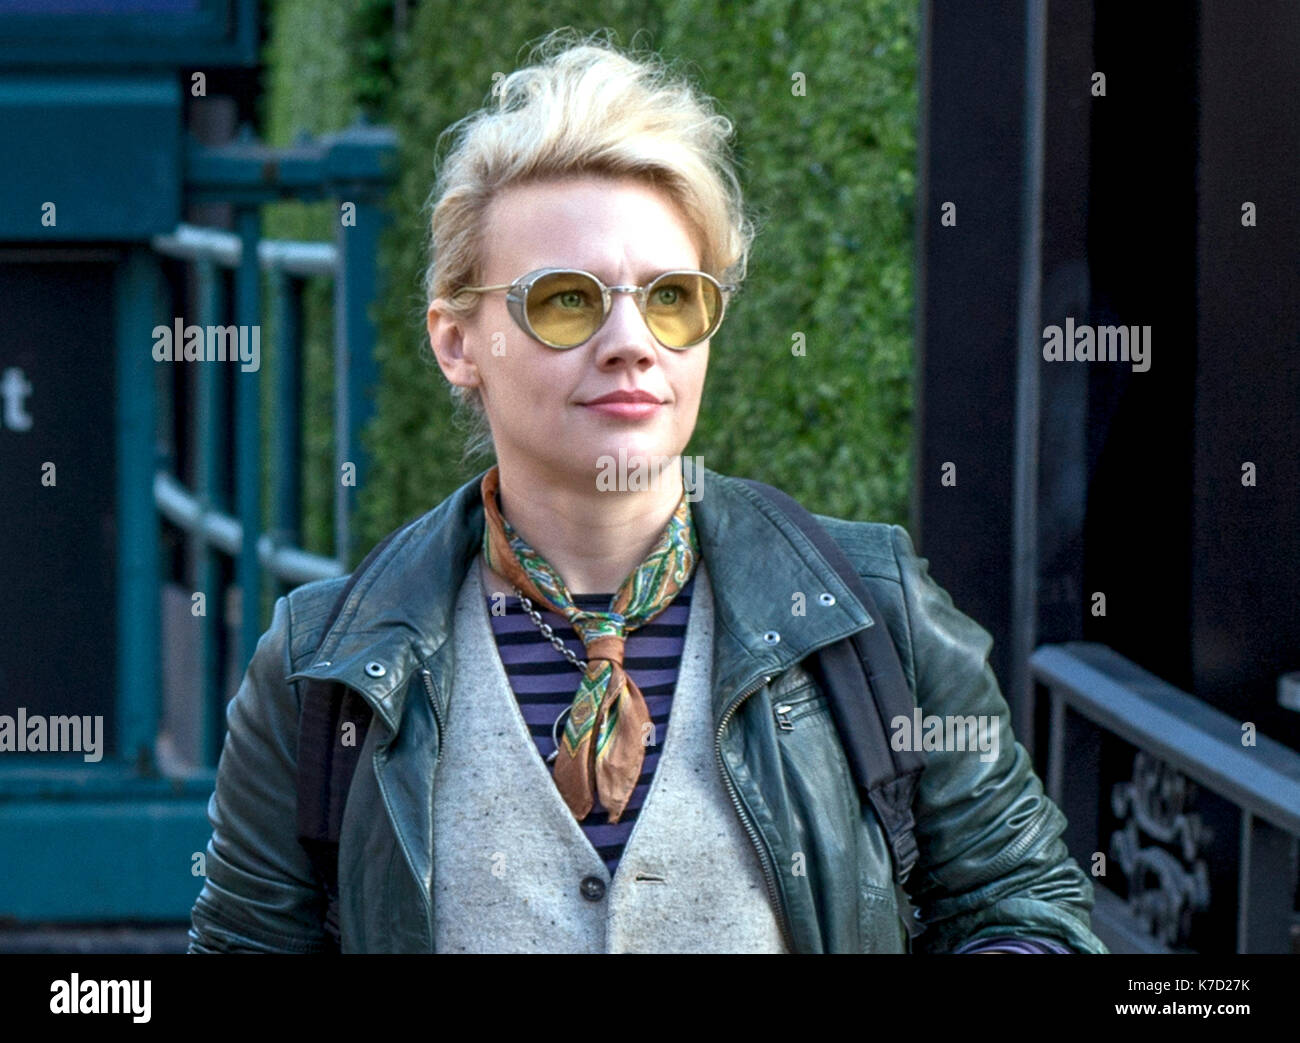 Photo Must Be Credited ©Supplied by Alpha 070000 June 2016 Ghostbuster's  Holtzmann played by Kate McKinnon in Columbia Pictures Ghostbusters Movie  Stock Photo - Alamy